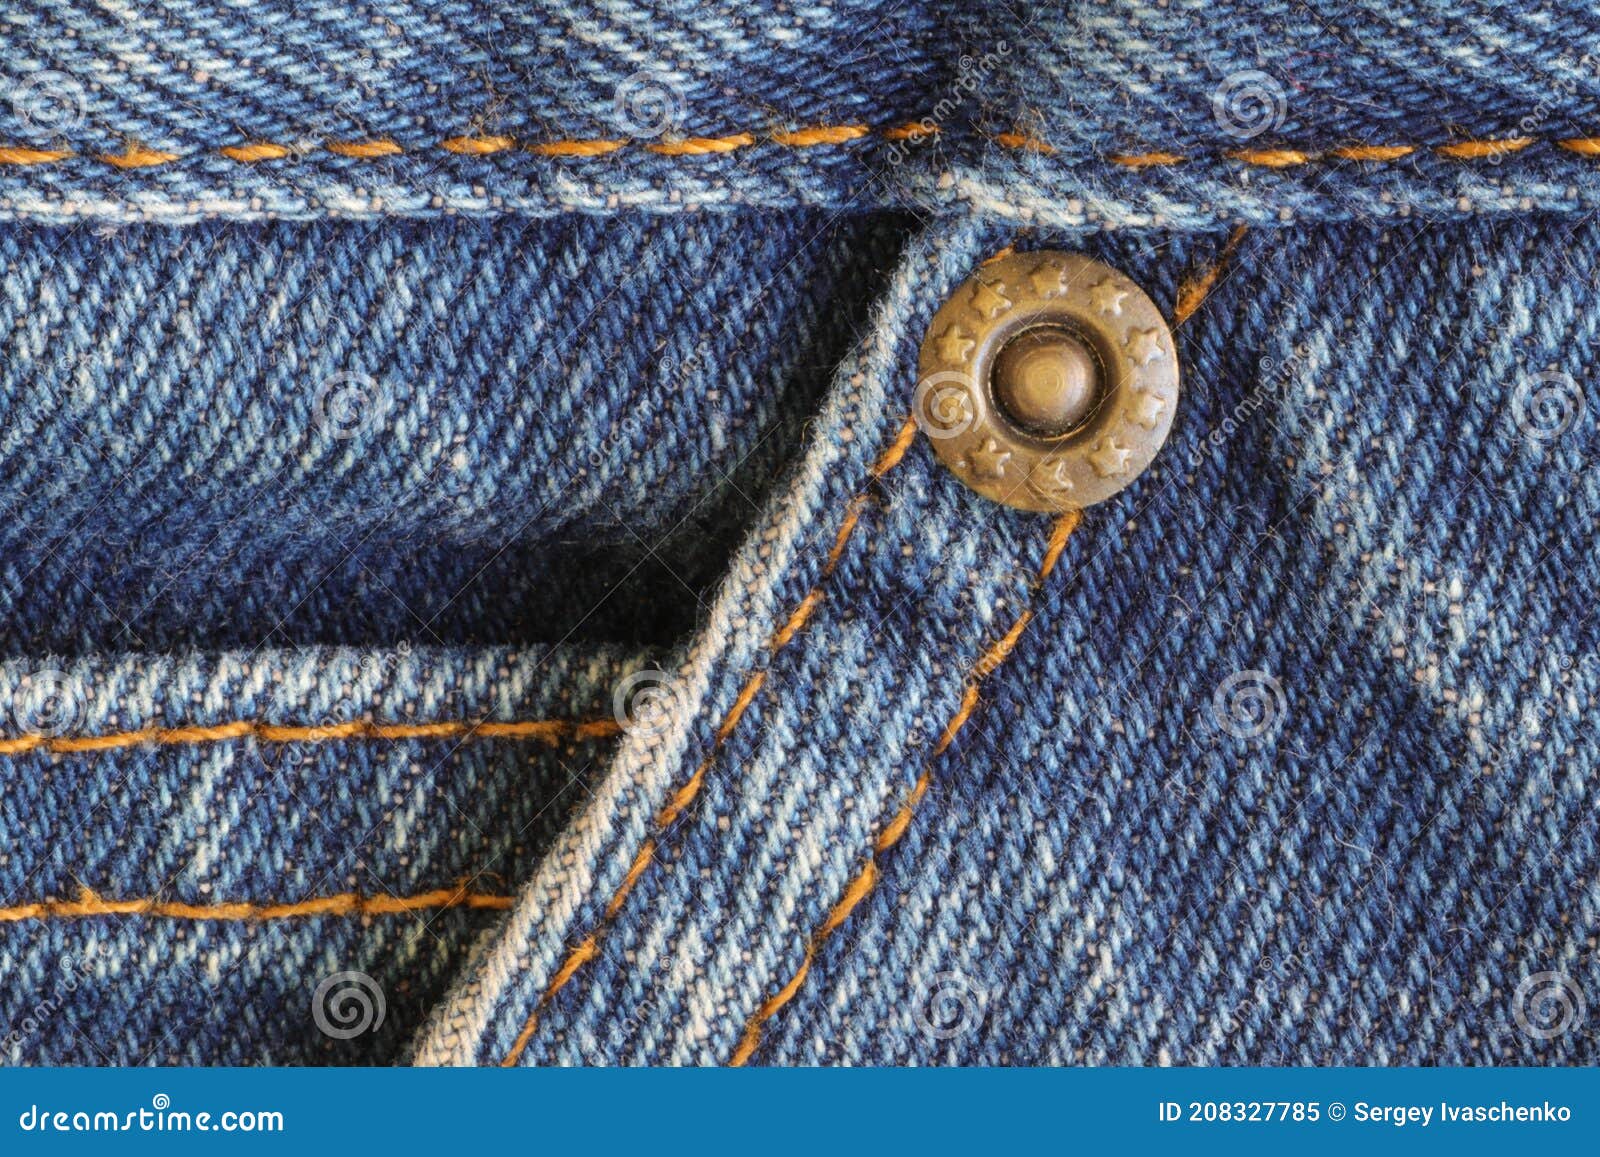 Fabric Texture with Rivets for Clothes. Stock Image - Image of blue ...